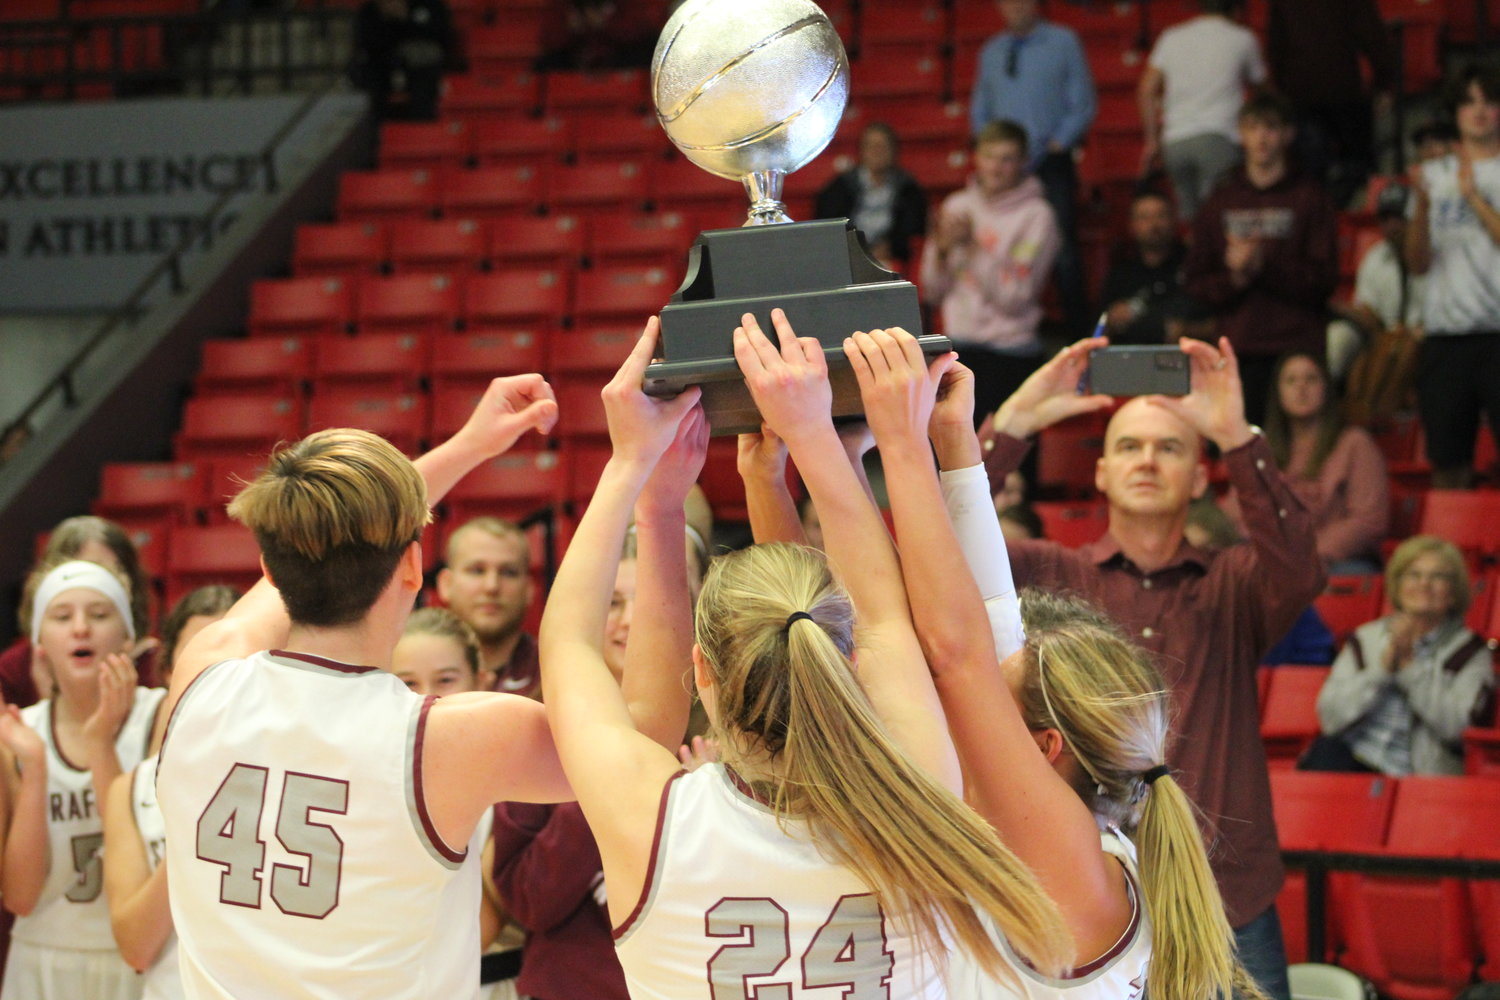 The Lady Indians raise their championship trophy after winning the game against West Plains/